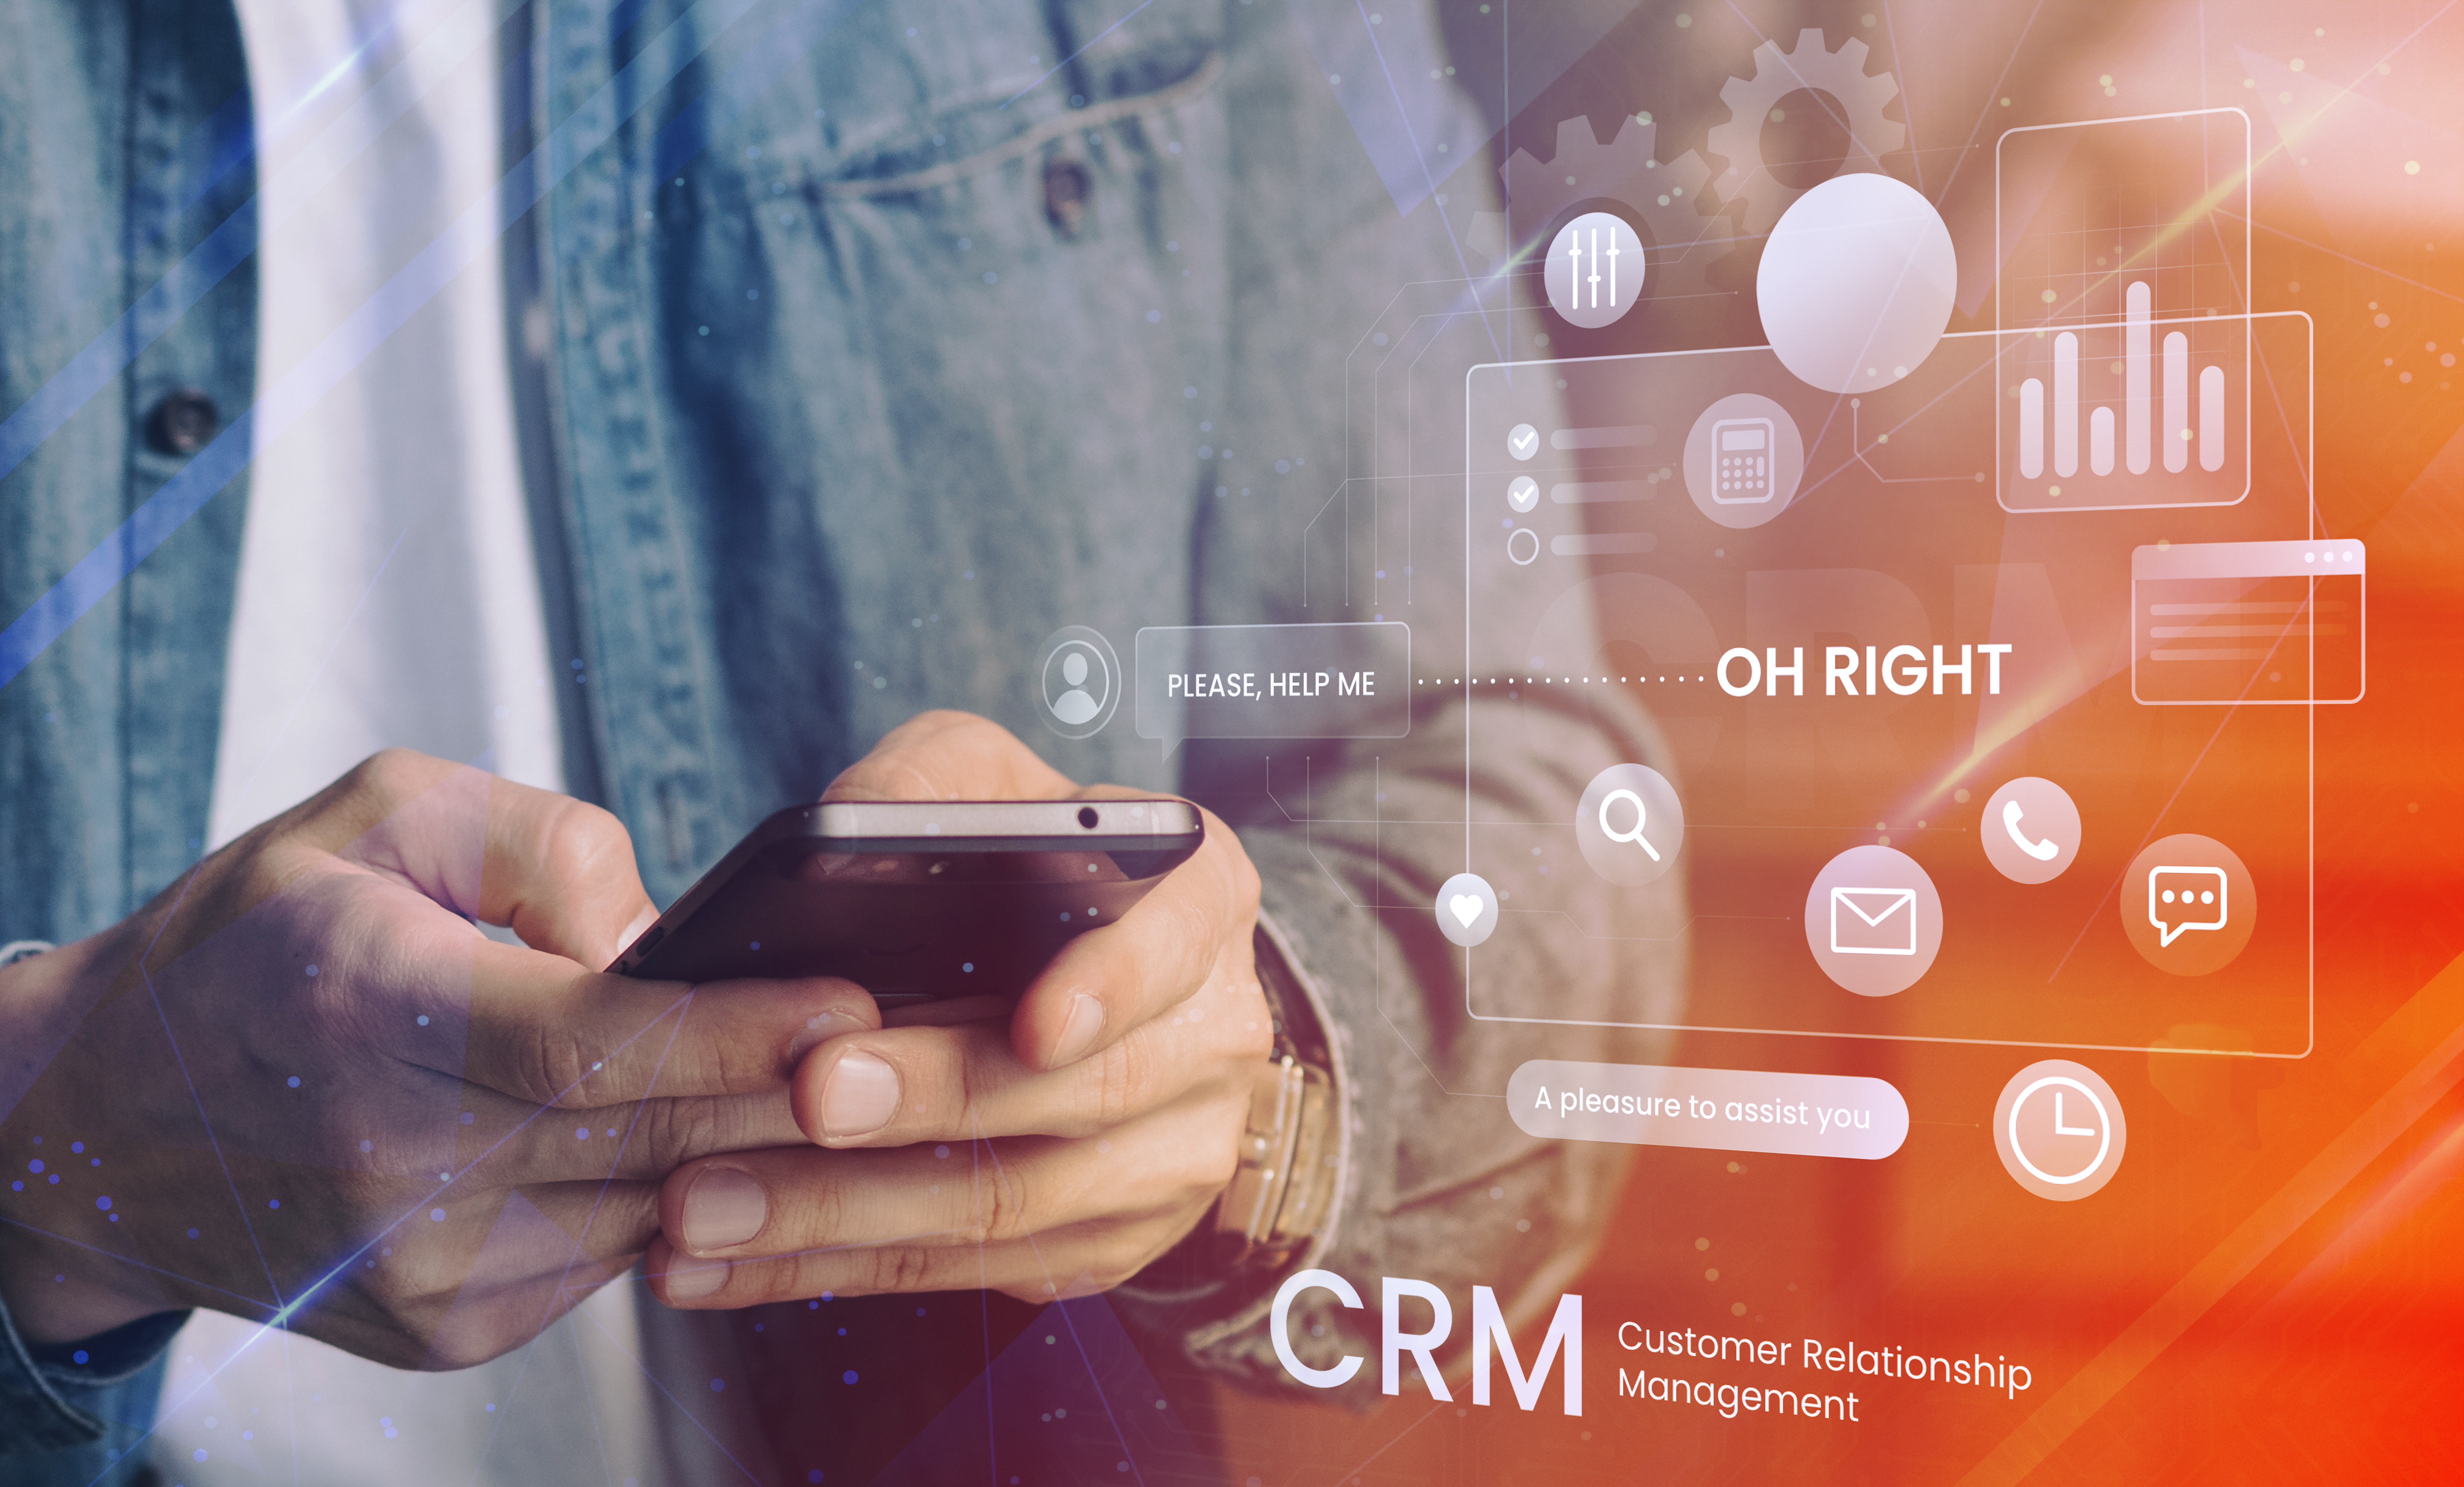 CREATING THE PERFECT TECH STACK FOR YOUR HOTEL: BUILDING GUEST RELATIONSHIPS WITH A CRM